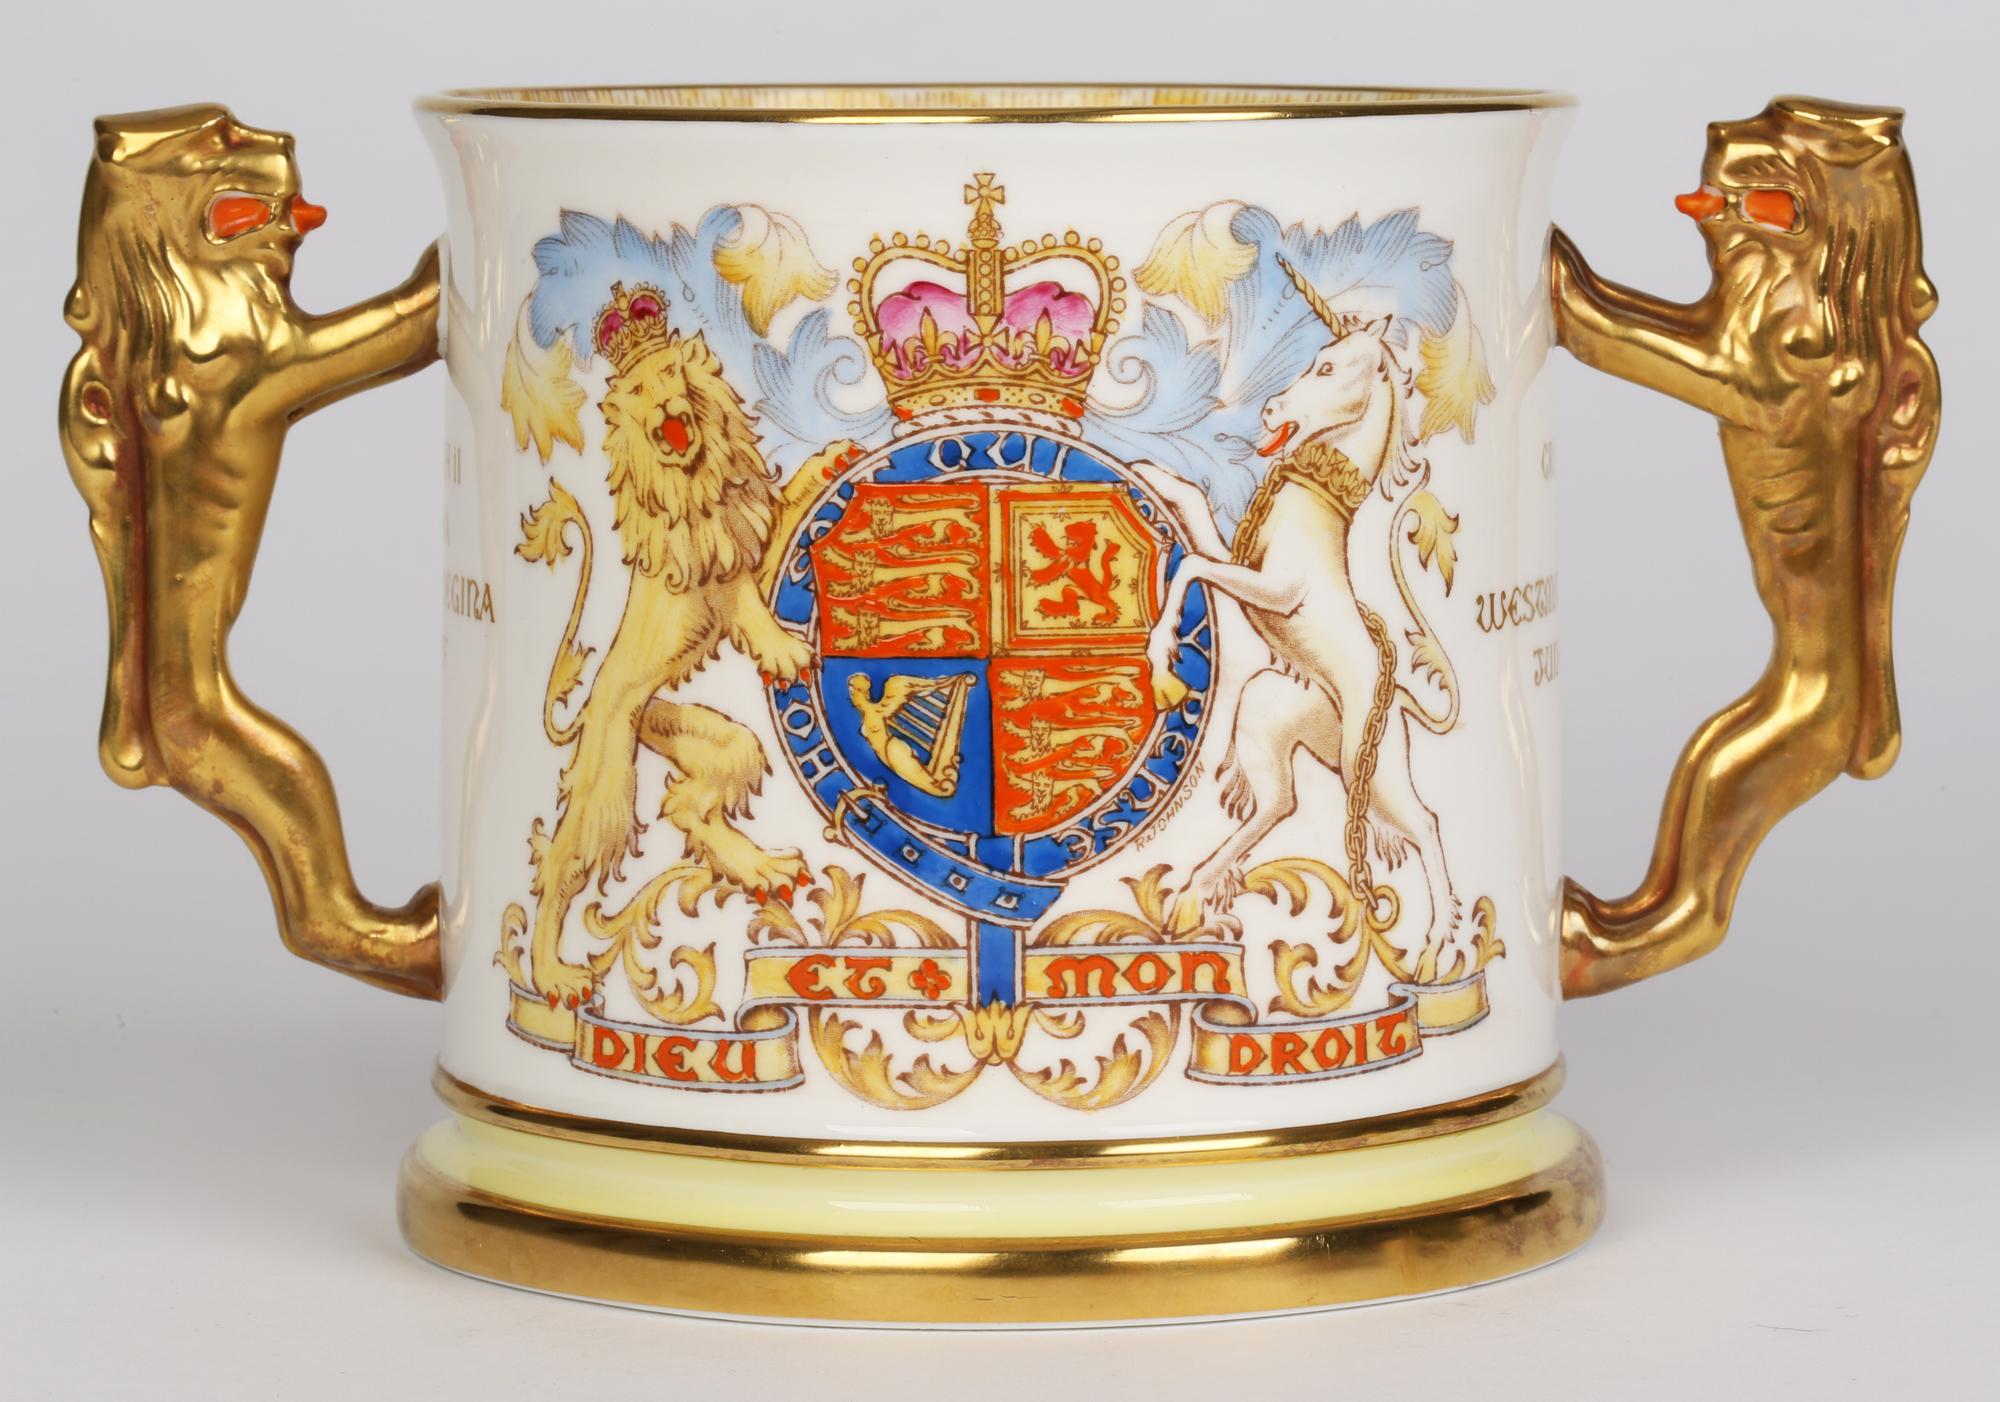 A very fine English Limited Edition porcelain twin handled tyg commemorating the Coronation of Queen Elizabeth II in 1953 and made by Paragon China. The large cylindrical shaped tyg stands on a wider stepped foot with rampant lion handles applied